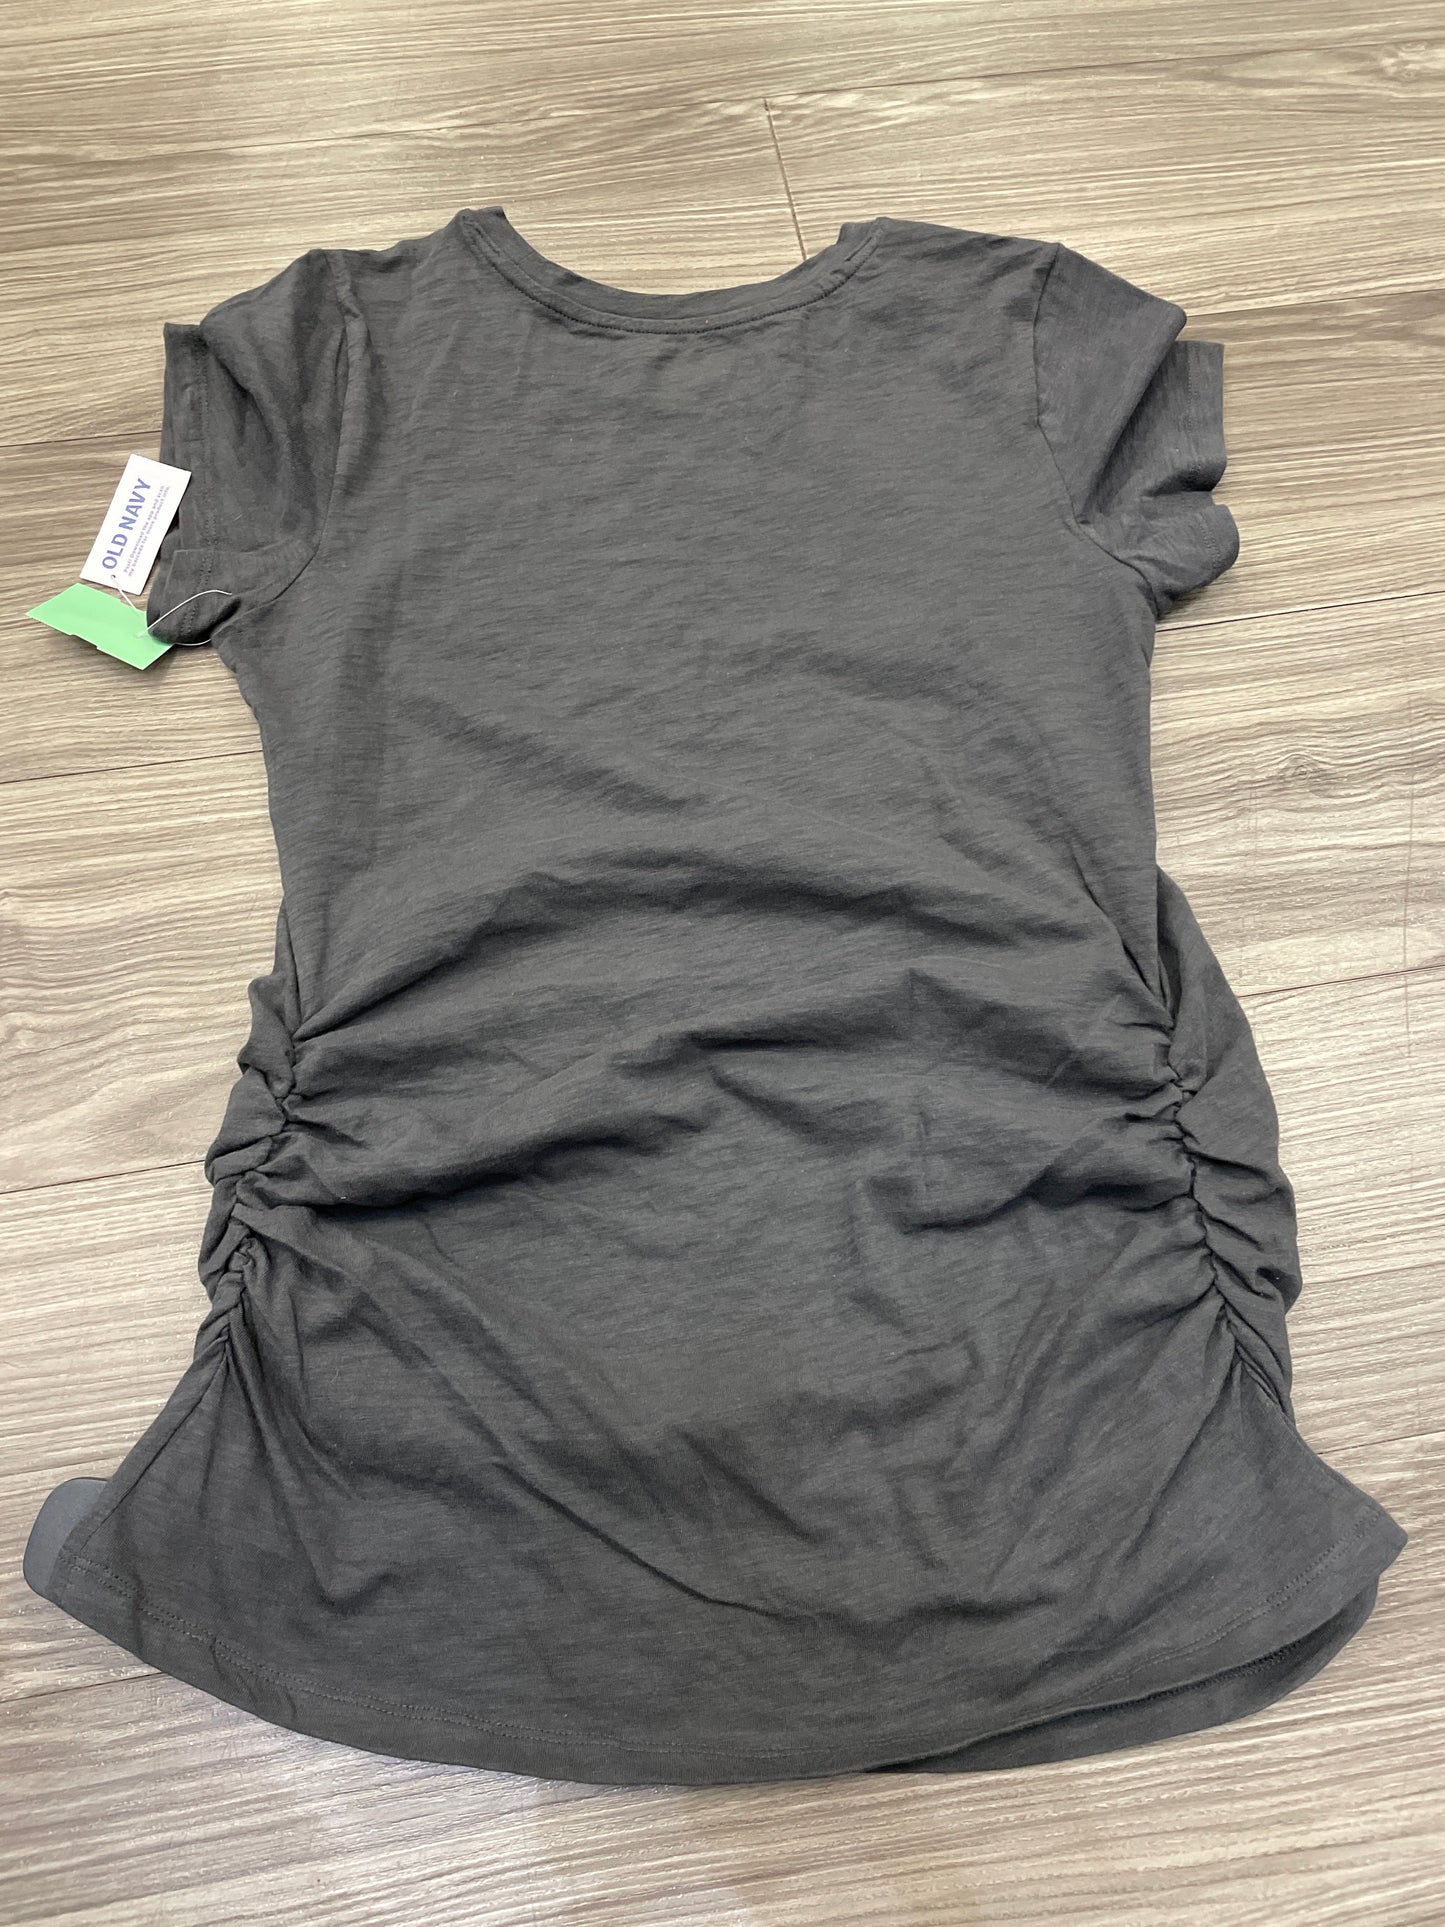 Maternity Top Short Sleeve Old Navy, Size M